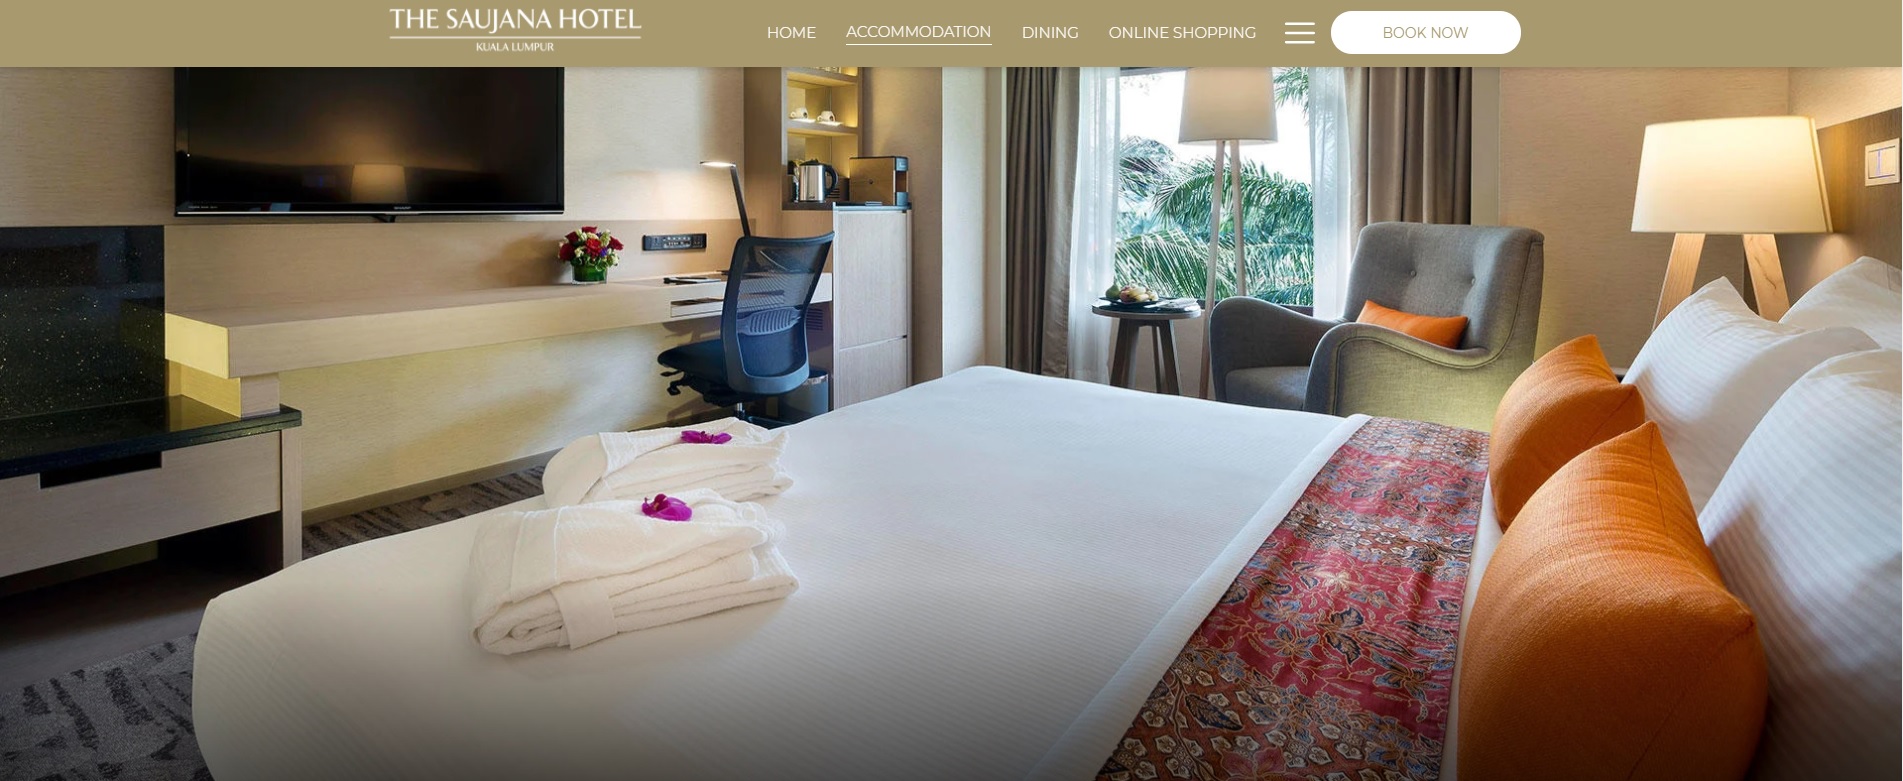 The Saujana Hotel is one of the first few hotels currently available on SafeQ